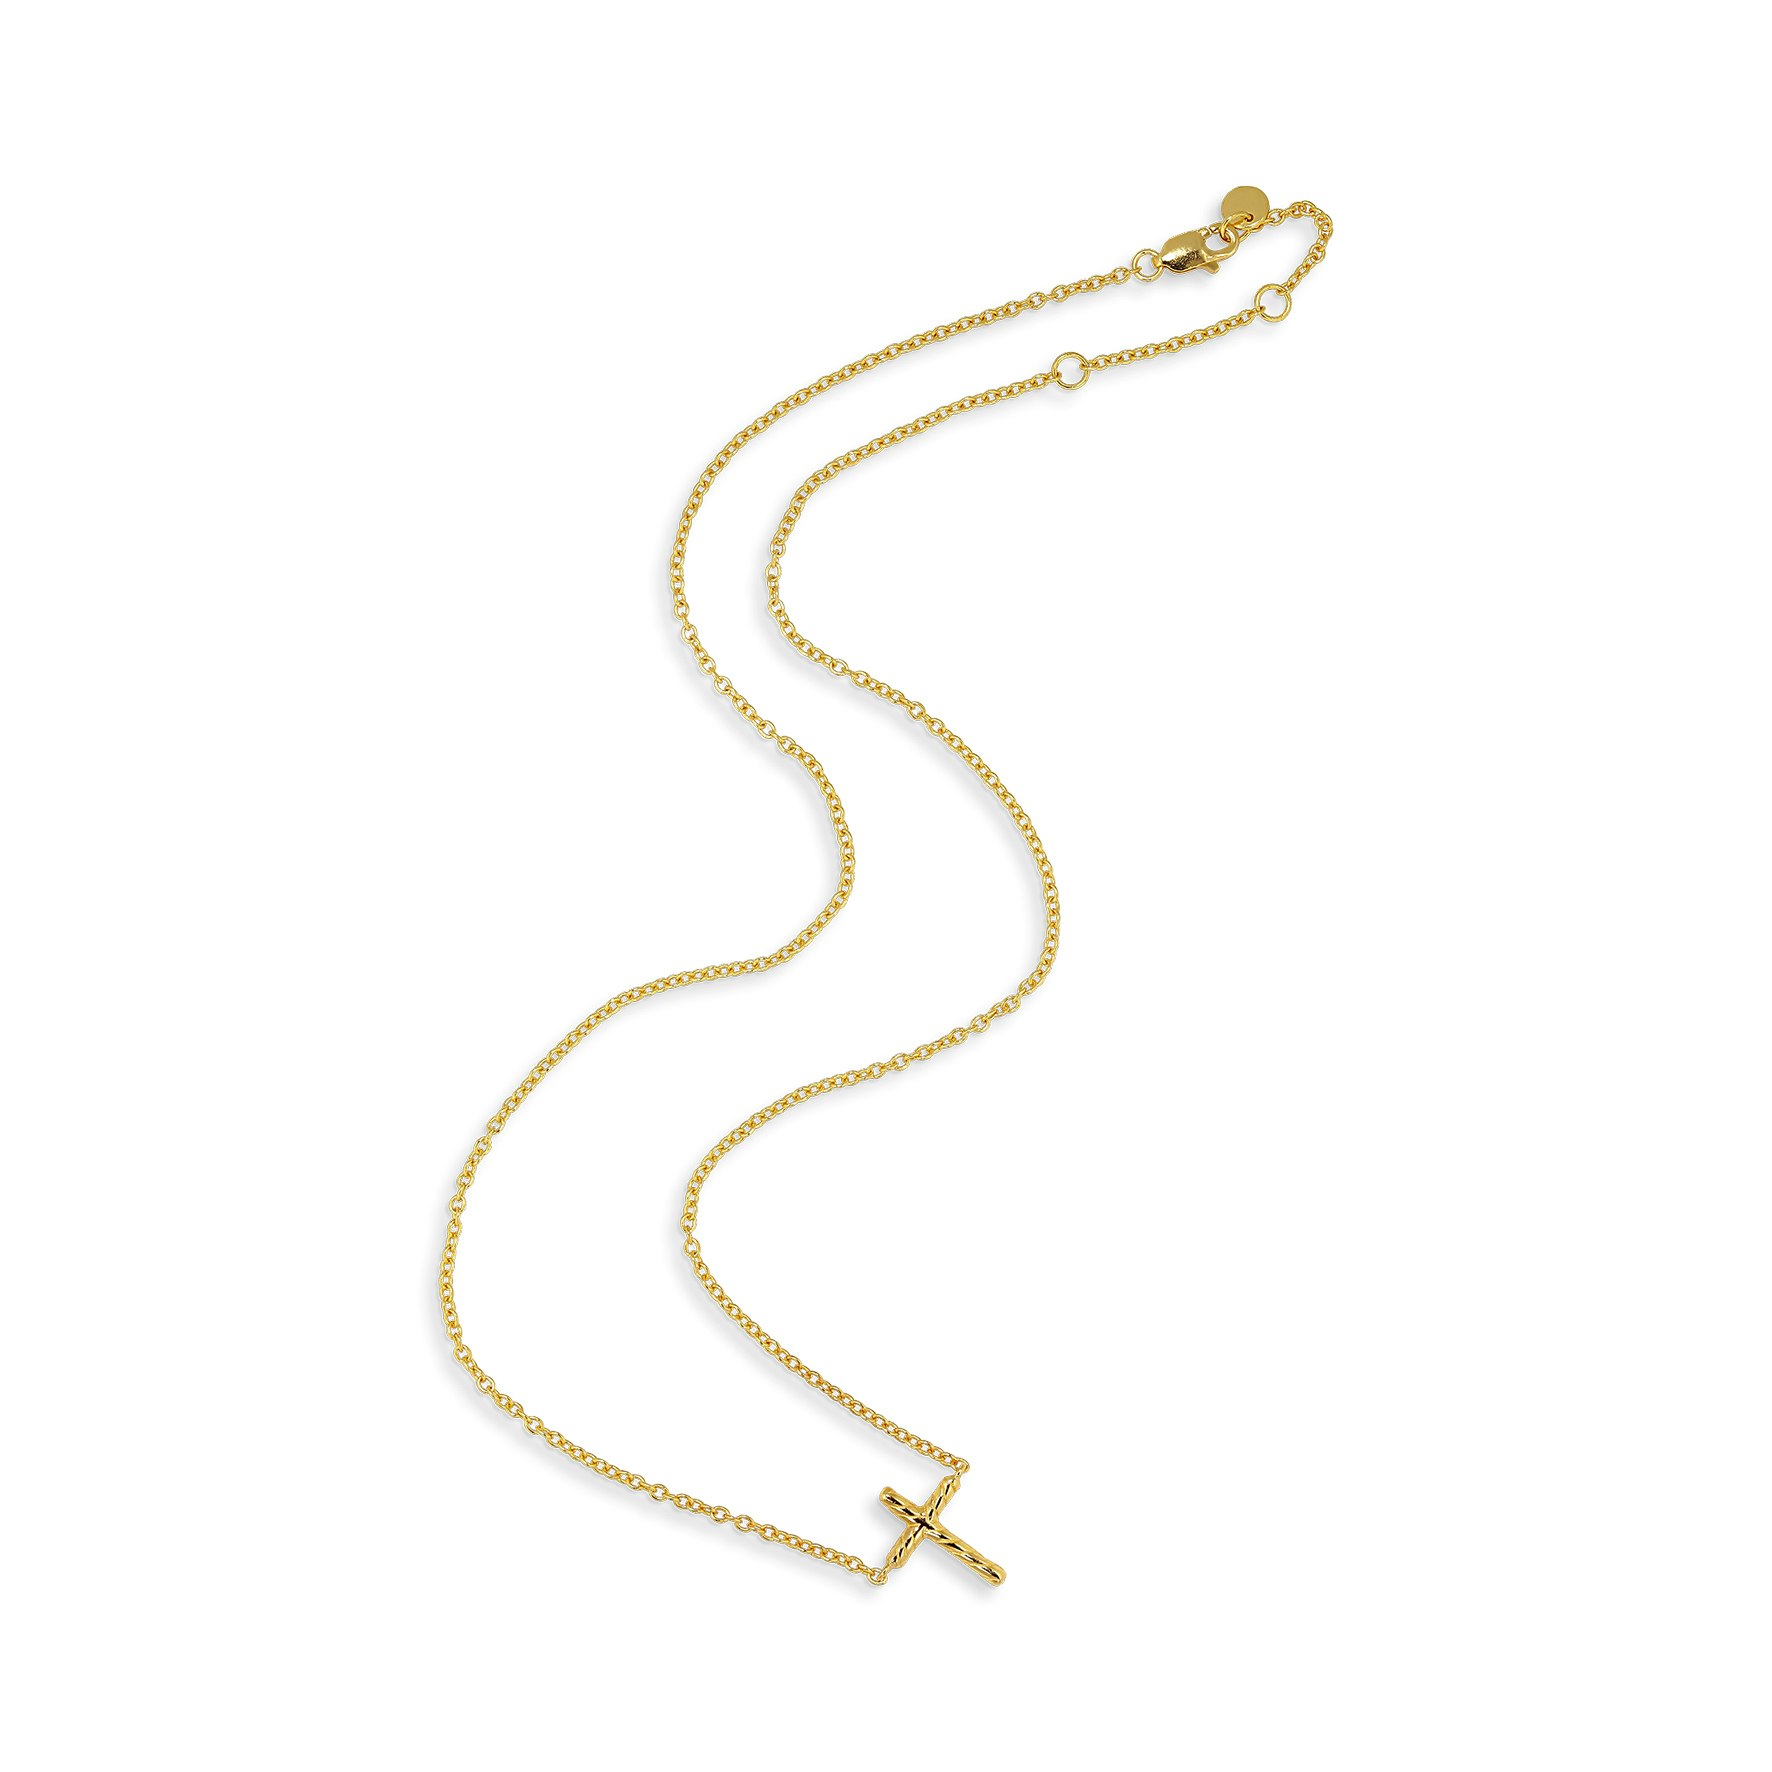 Cross Necklace from Jane Kønig in Goldplated-Silver Sterling 925